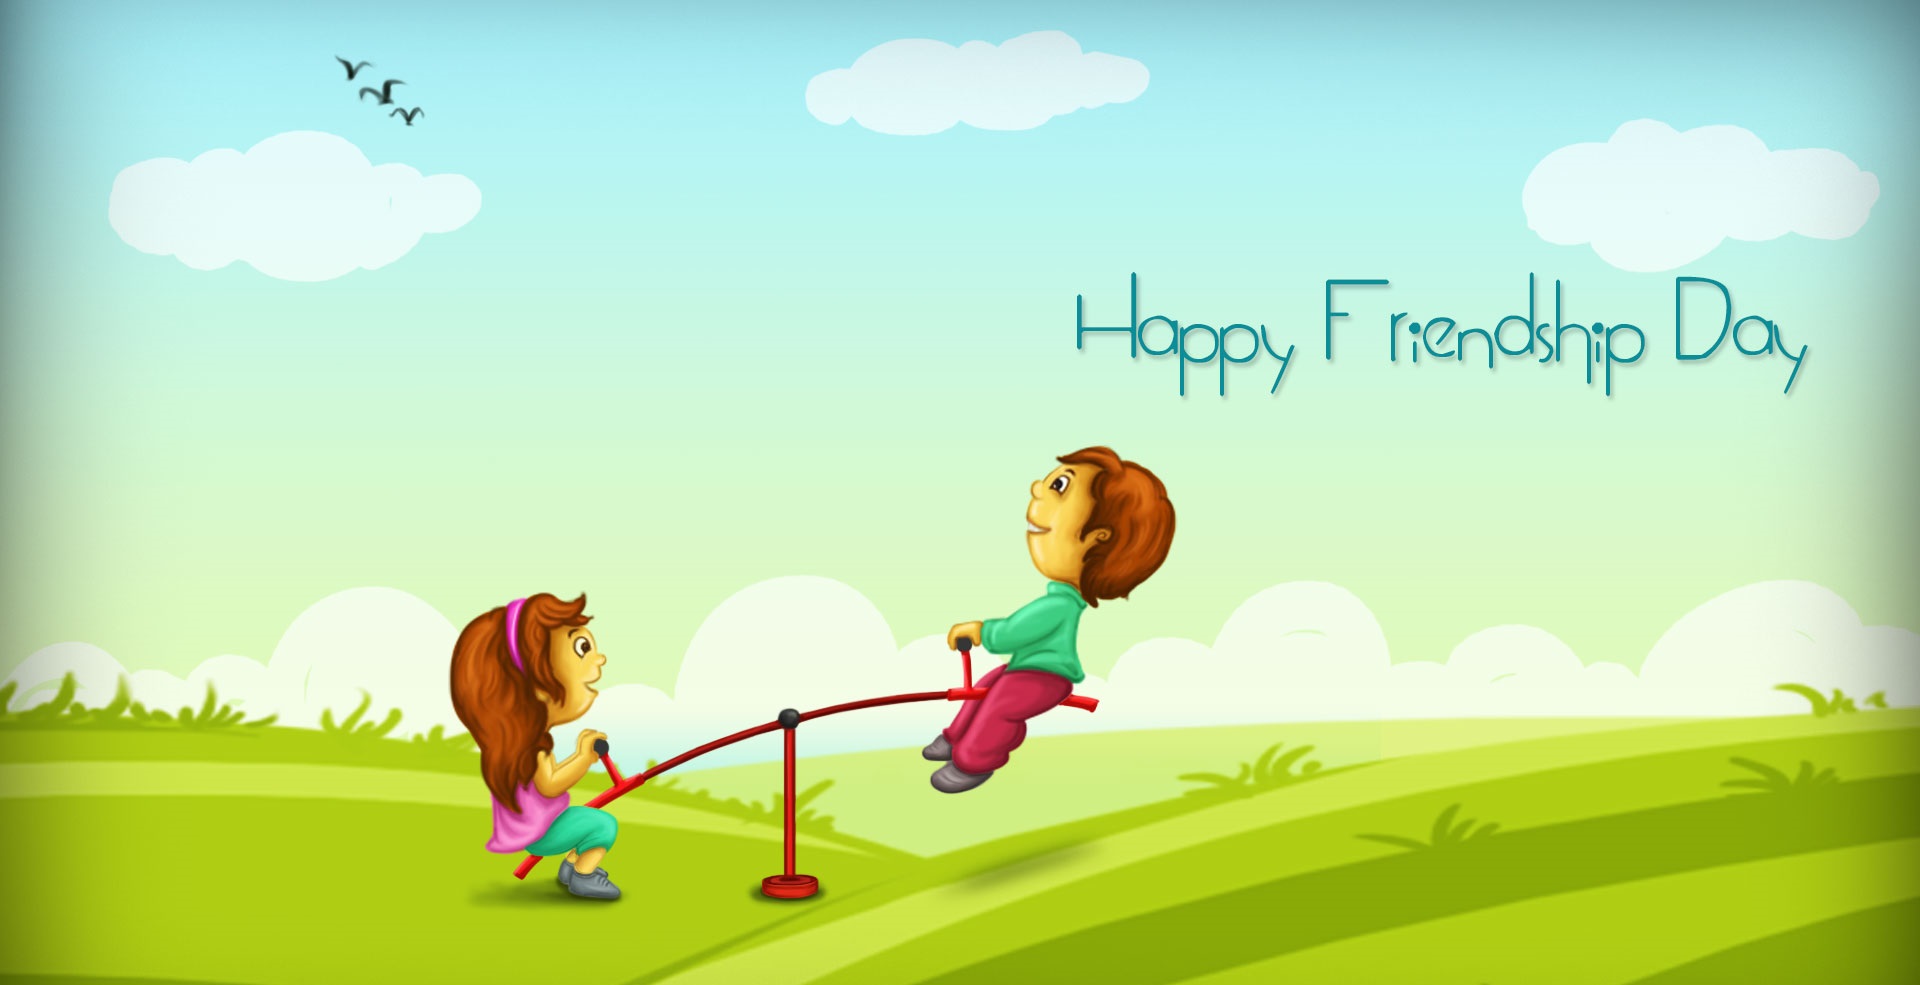 Happy Friendship Day 2016 fb cover Images (12)